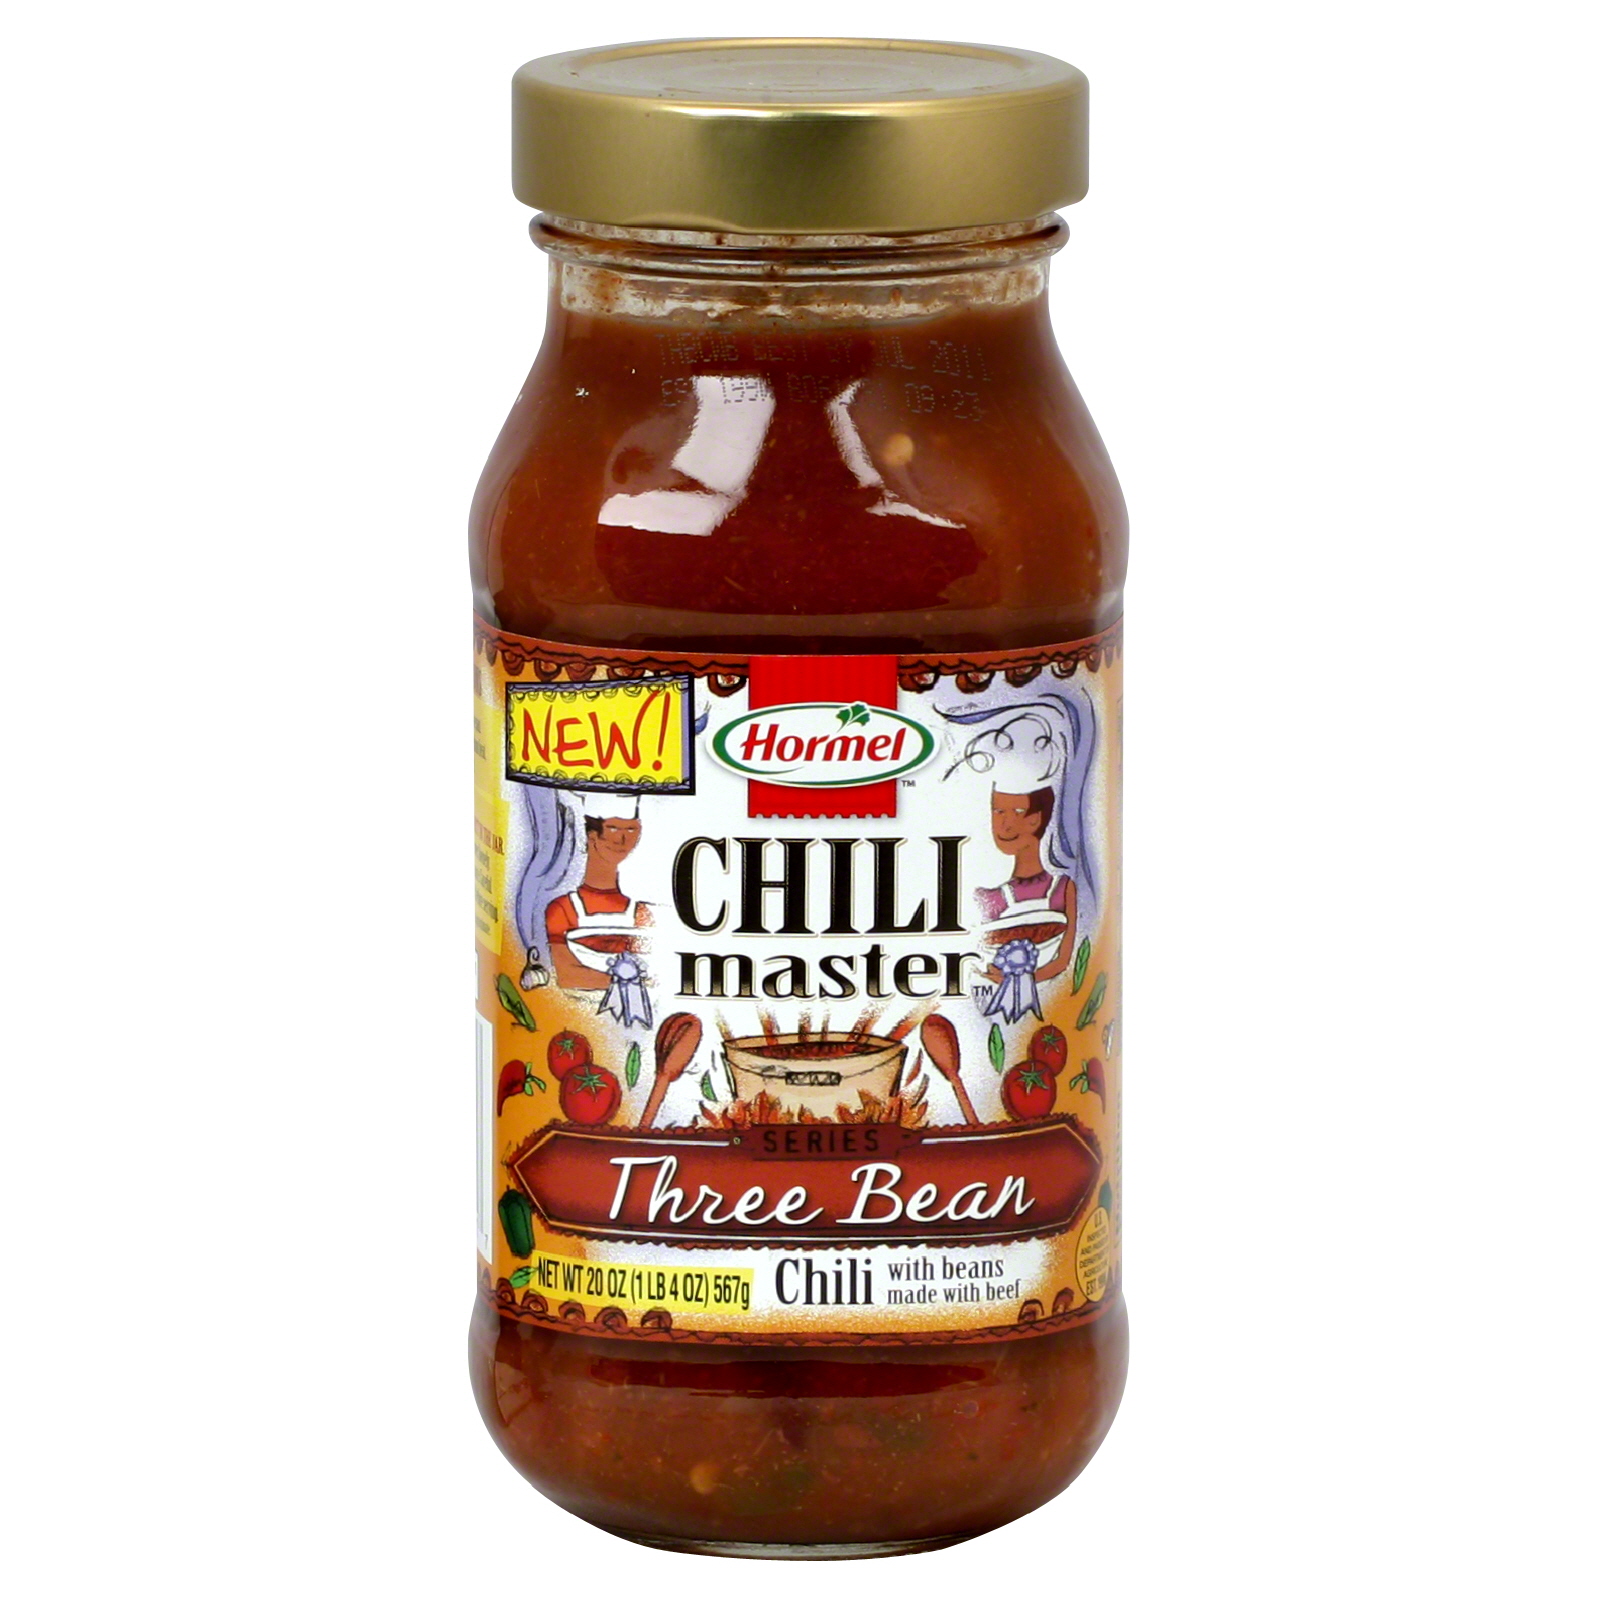 Hormel Chili Master Chili, with Beans, Made with Beef, 20 oz (1 lb 4 oz) 567 g